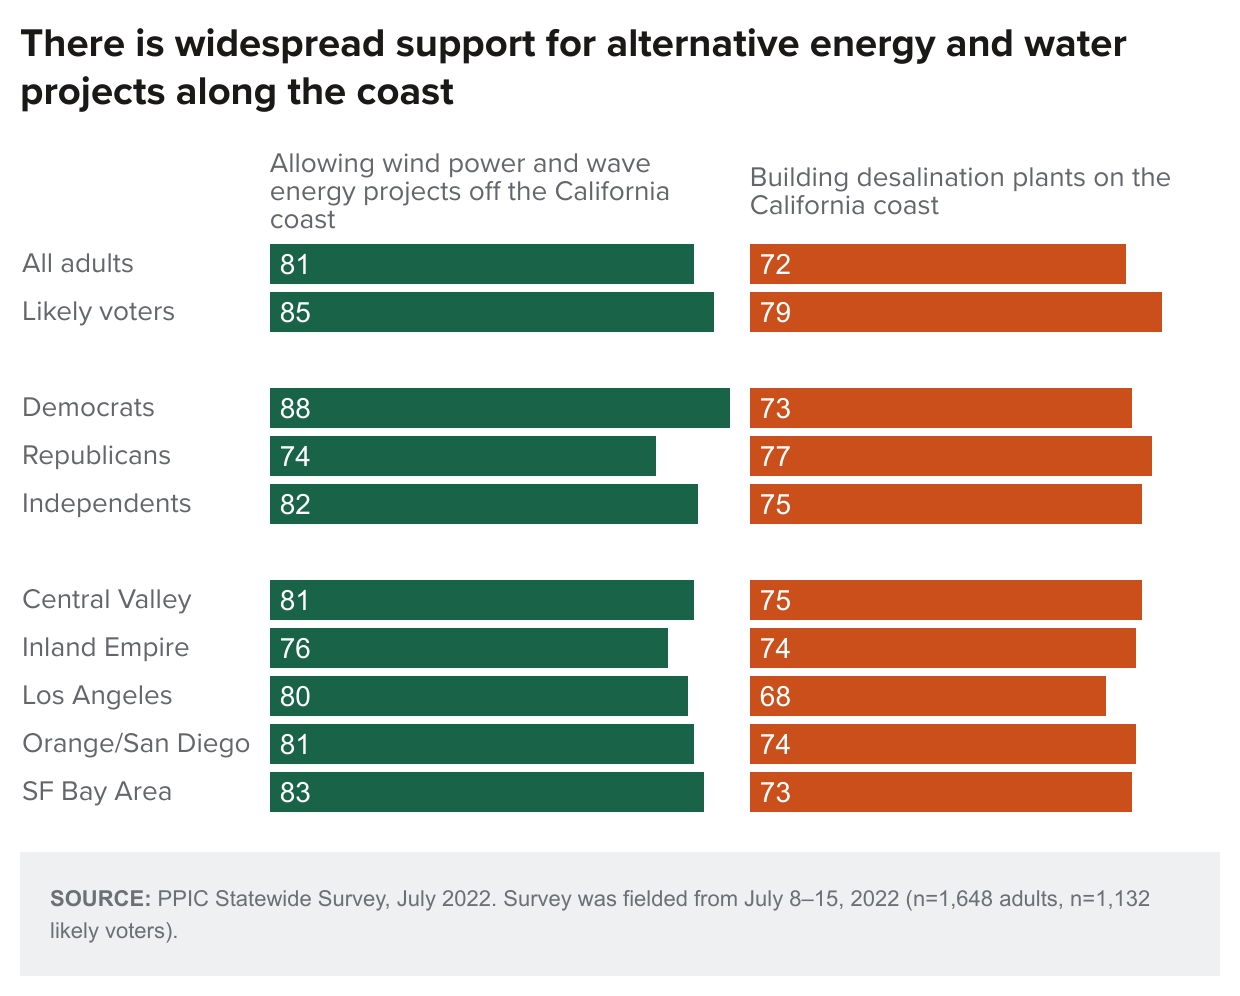 figure - There is widespread support for alternative energy and water projects along the coast